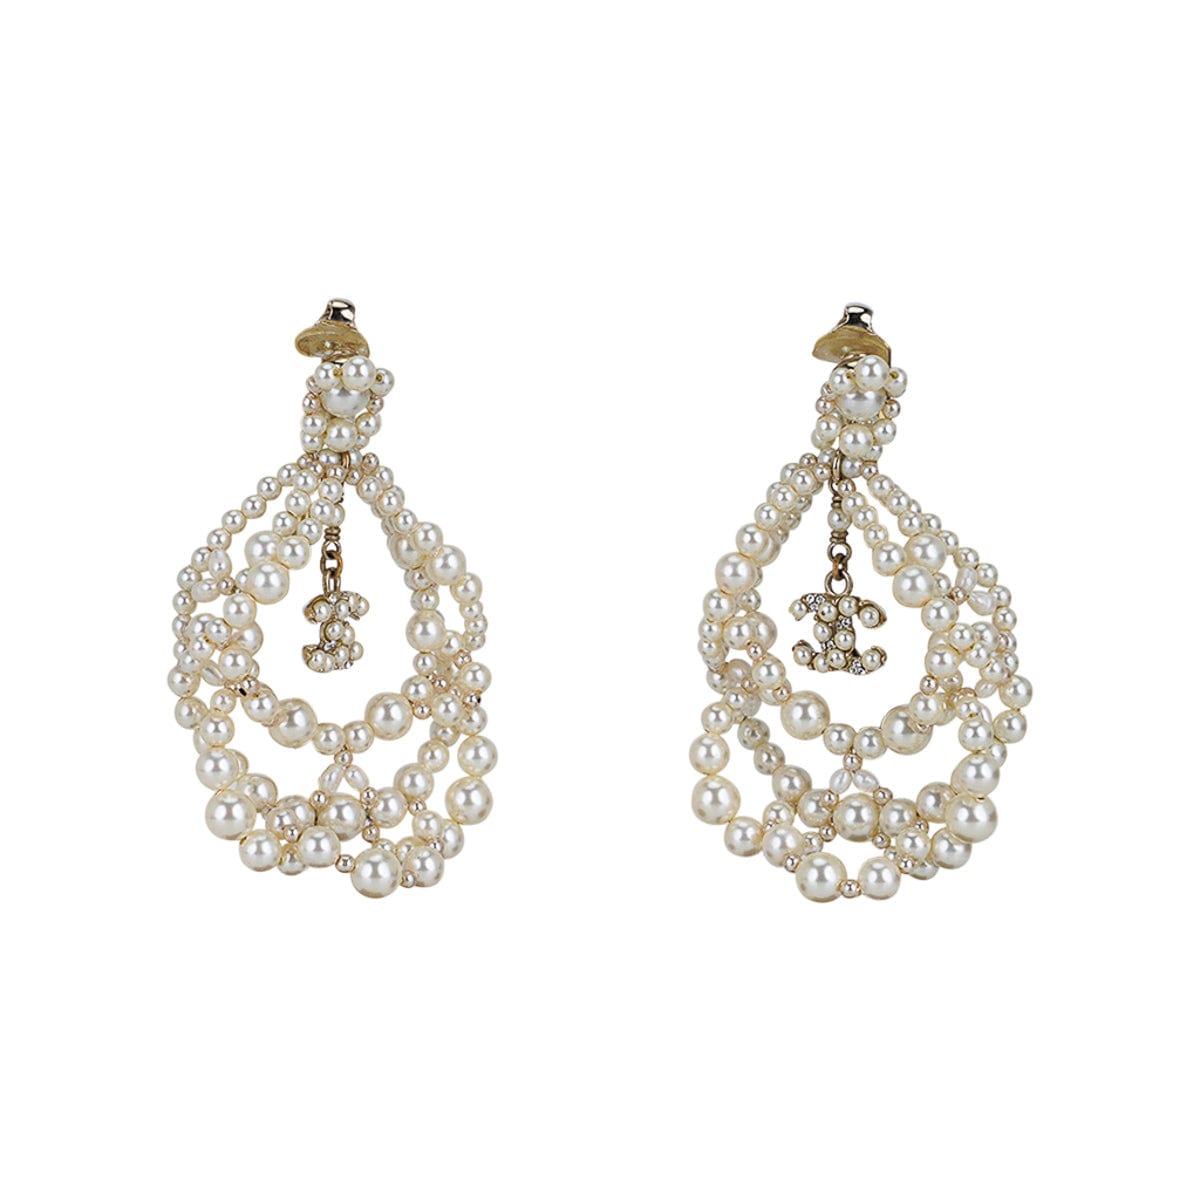 Chanel Pearl Drop Earrings with Crystals, New in Box WA001